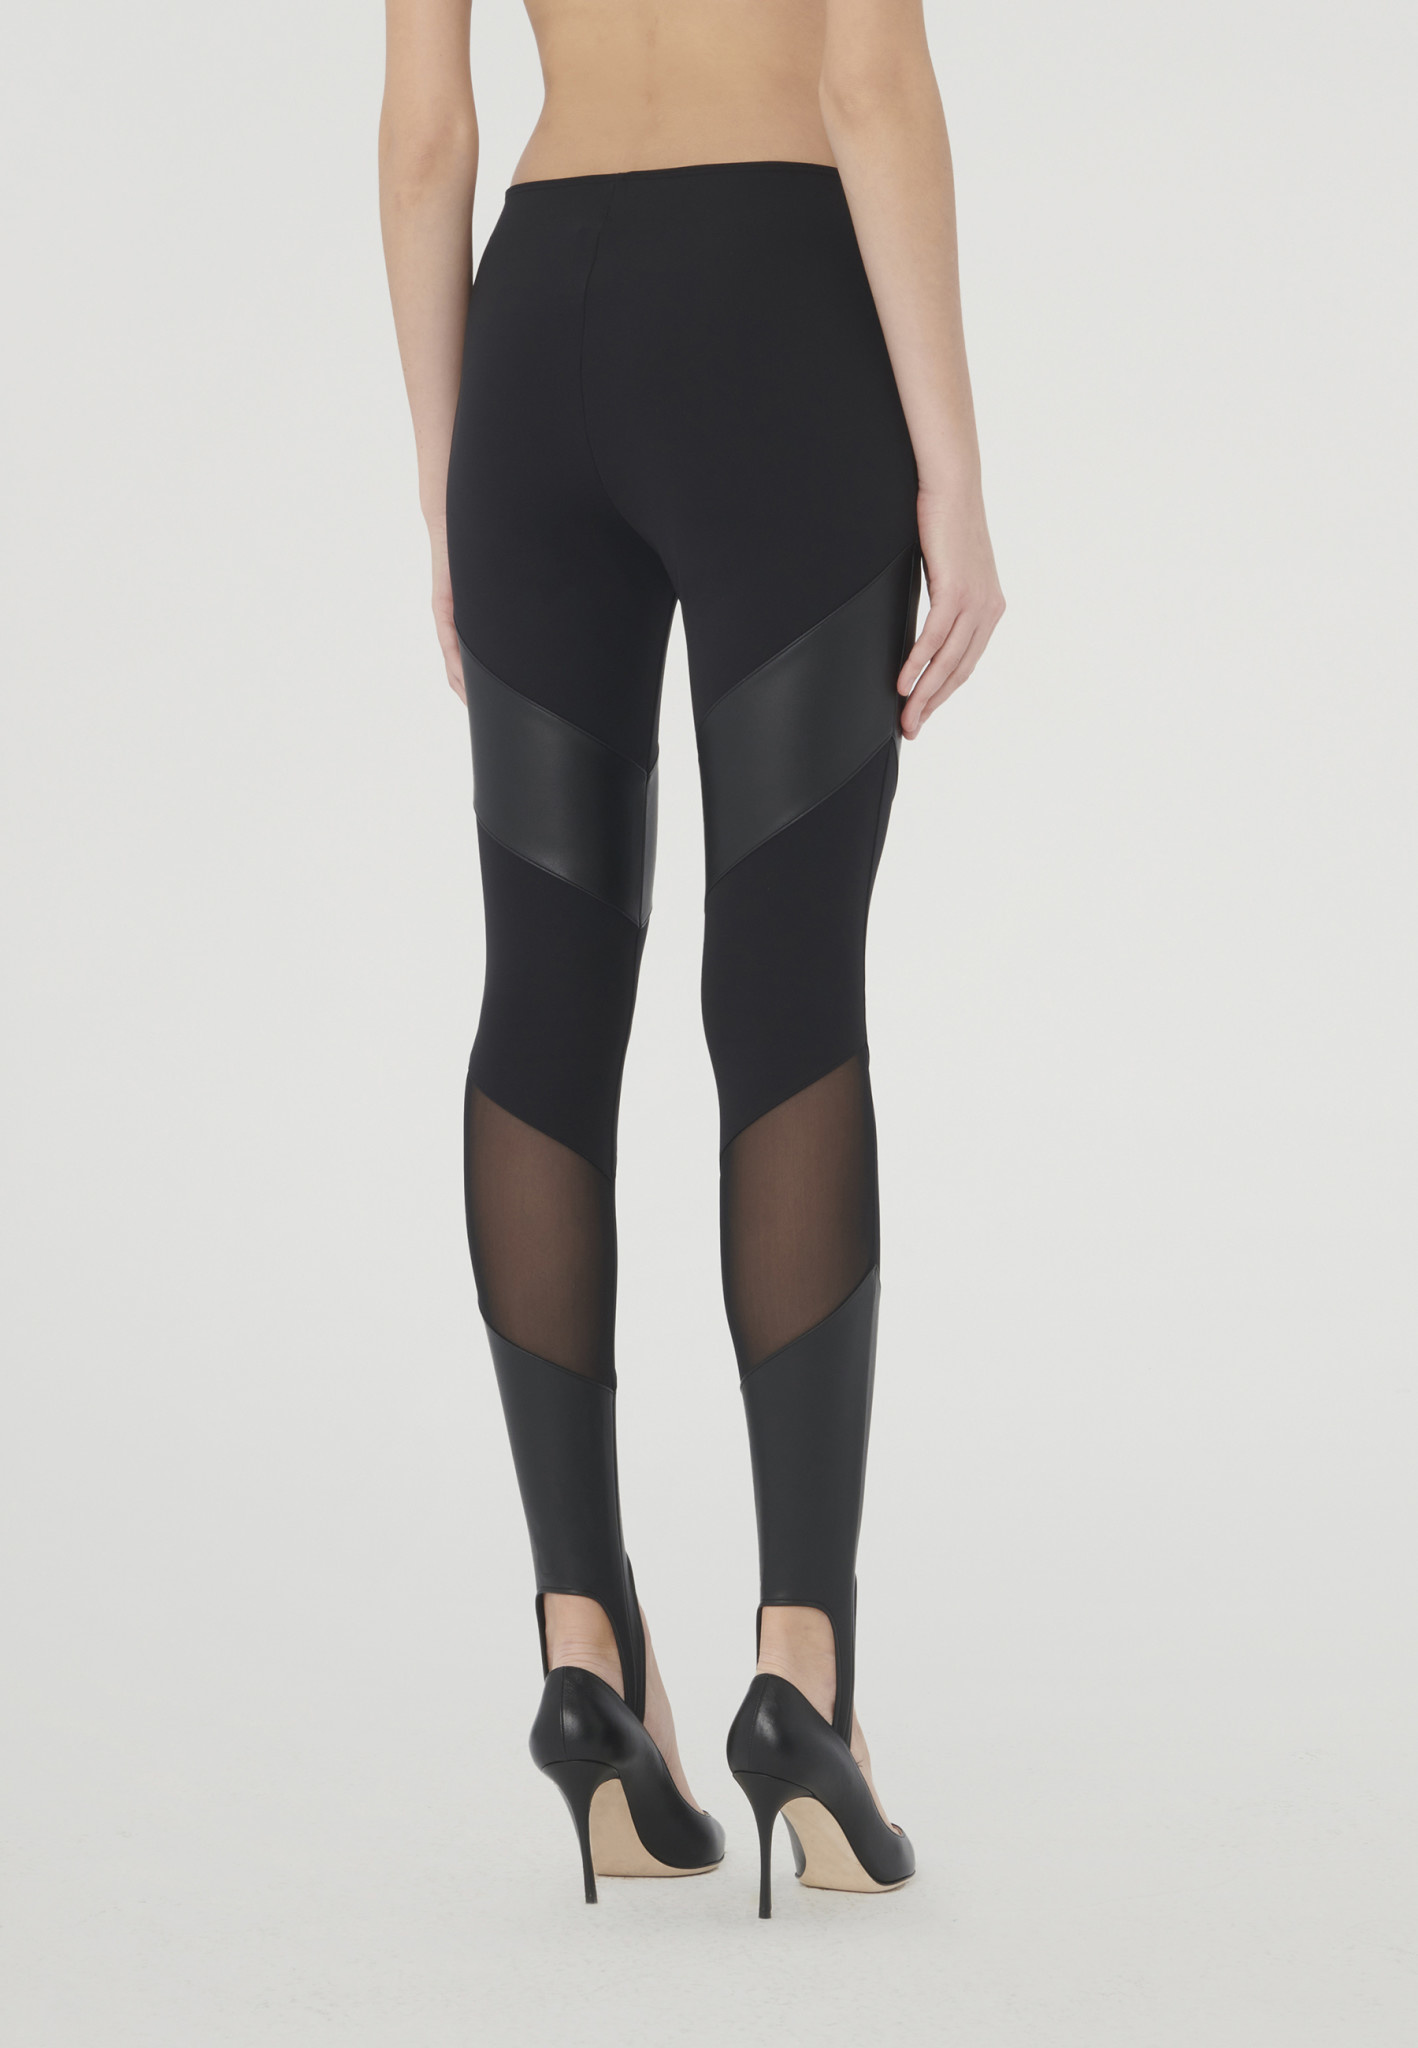 WOLFORD 19392 Eco Vegan Stirrup Trousers